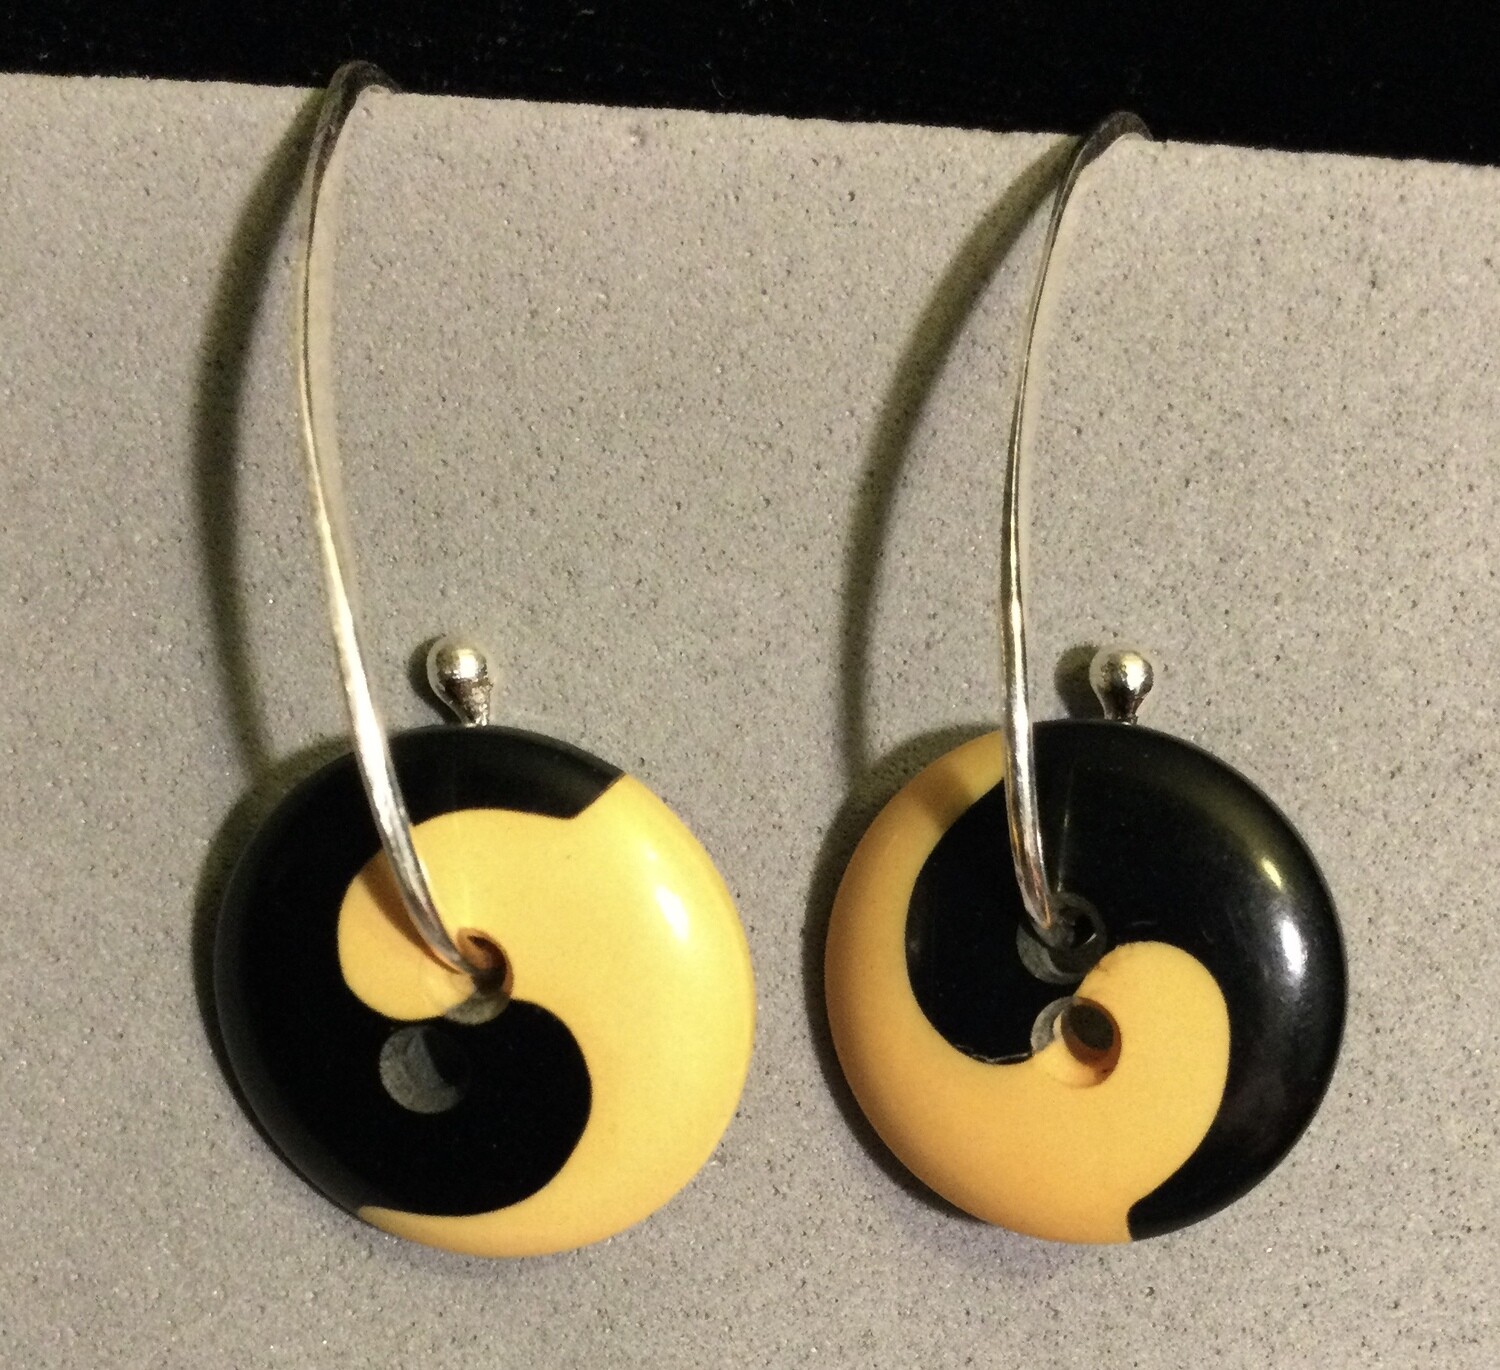 Handmade Sterling Interchangeable Button Earring Wires with Bakelite Yin Yang Buttons